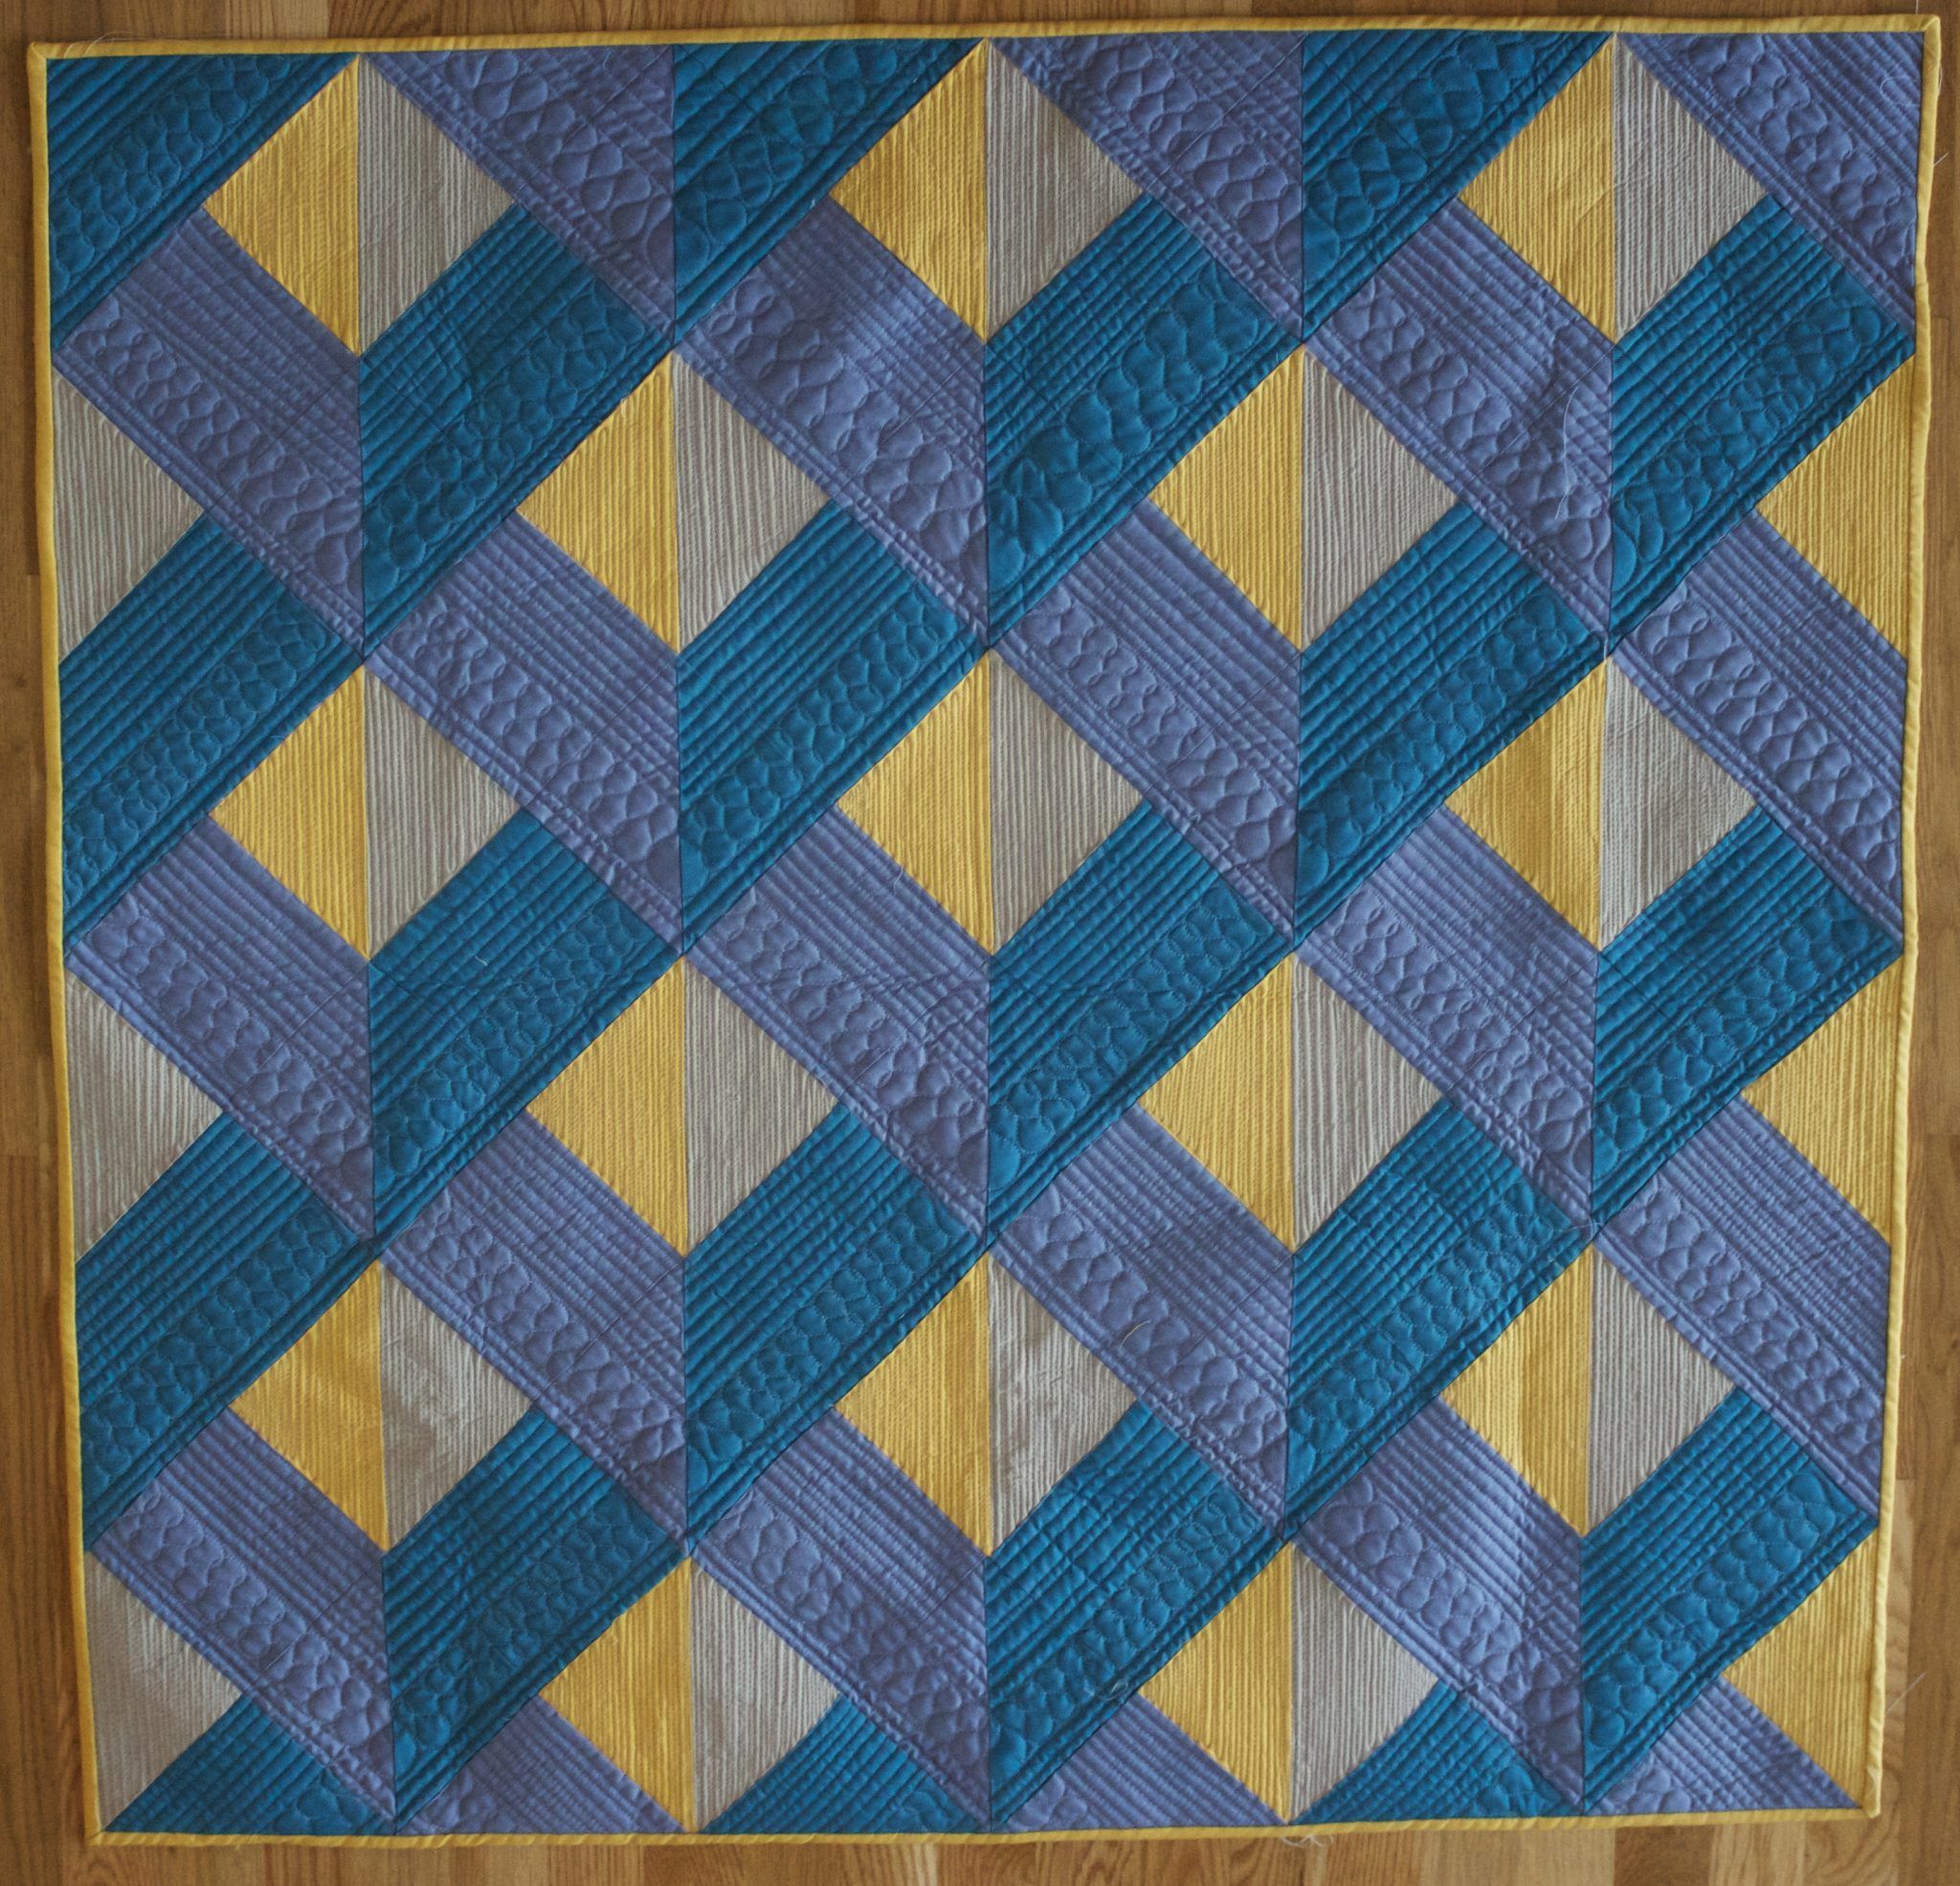 A free quilt pattern - Quilting Is ... -   Quilting patterns